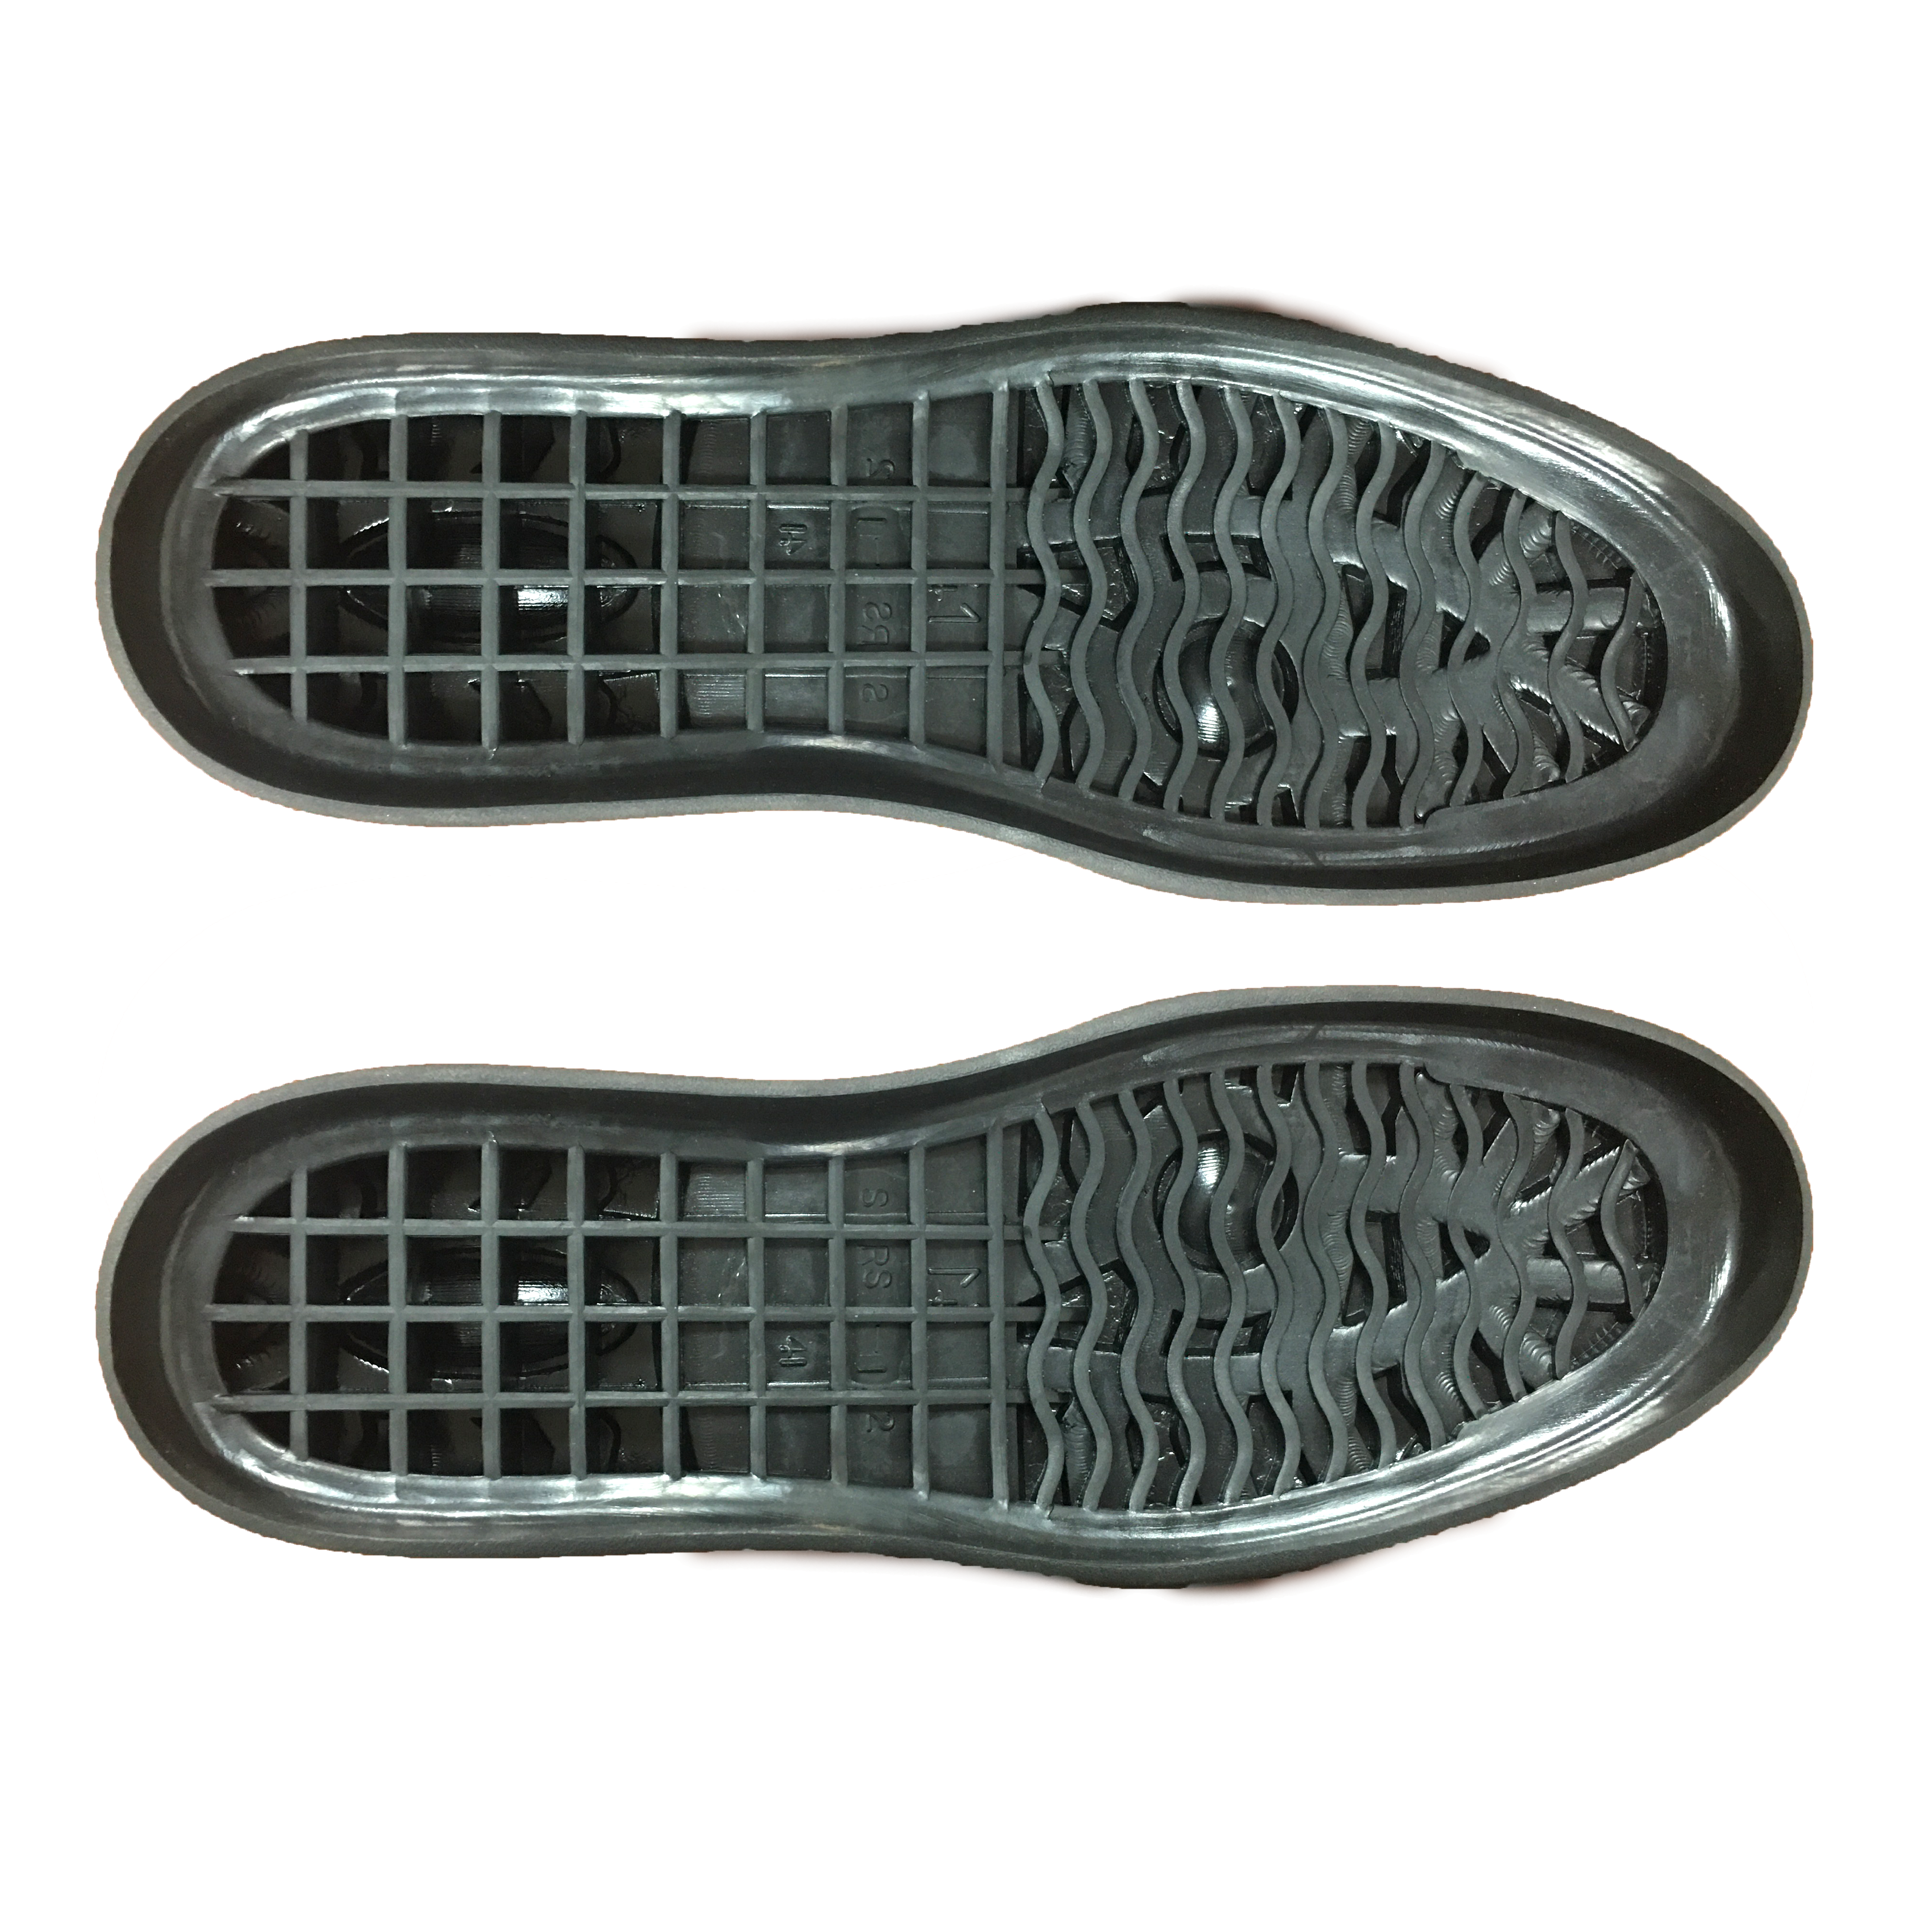 Click to enlarge image oil_resistance_high_performance_rubber_sole_01.png